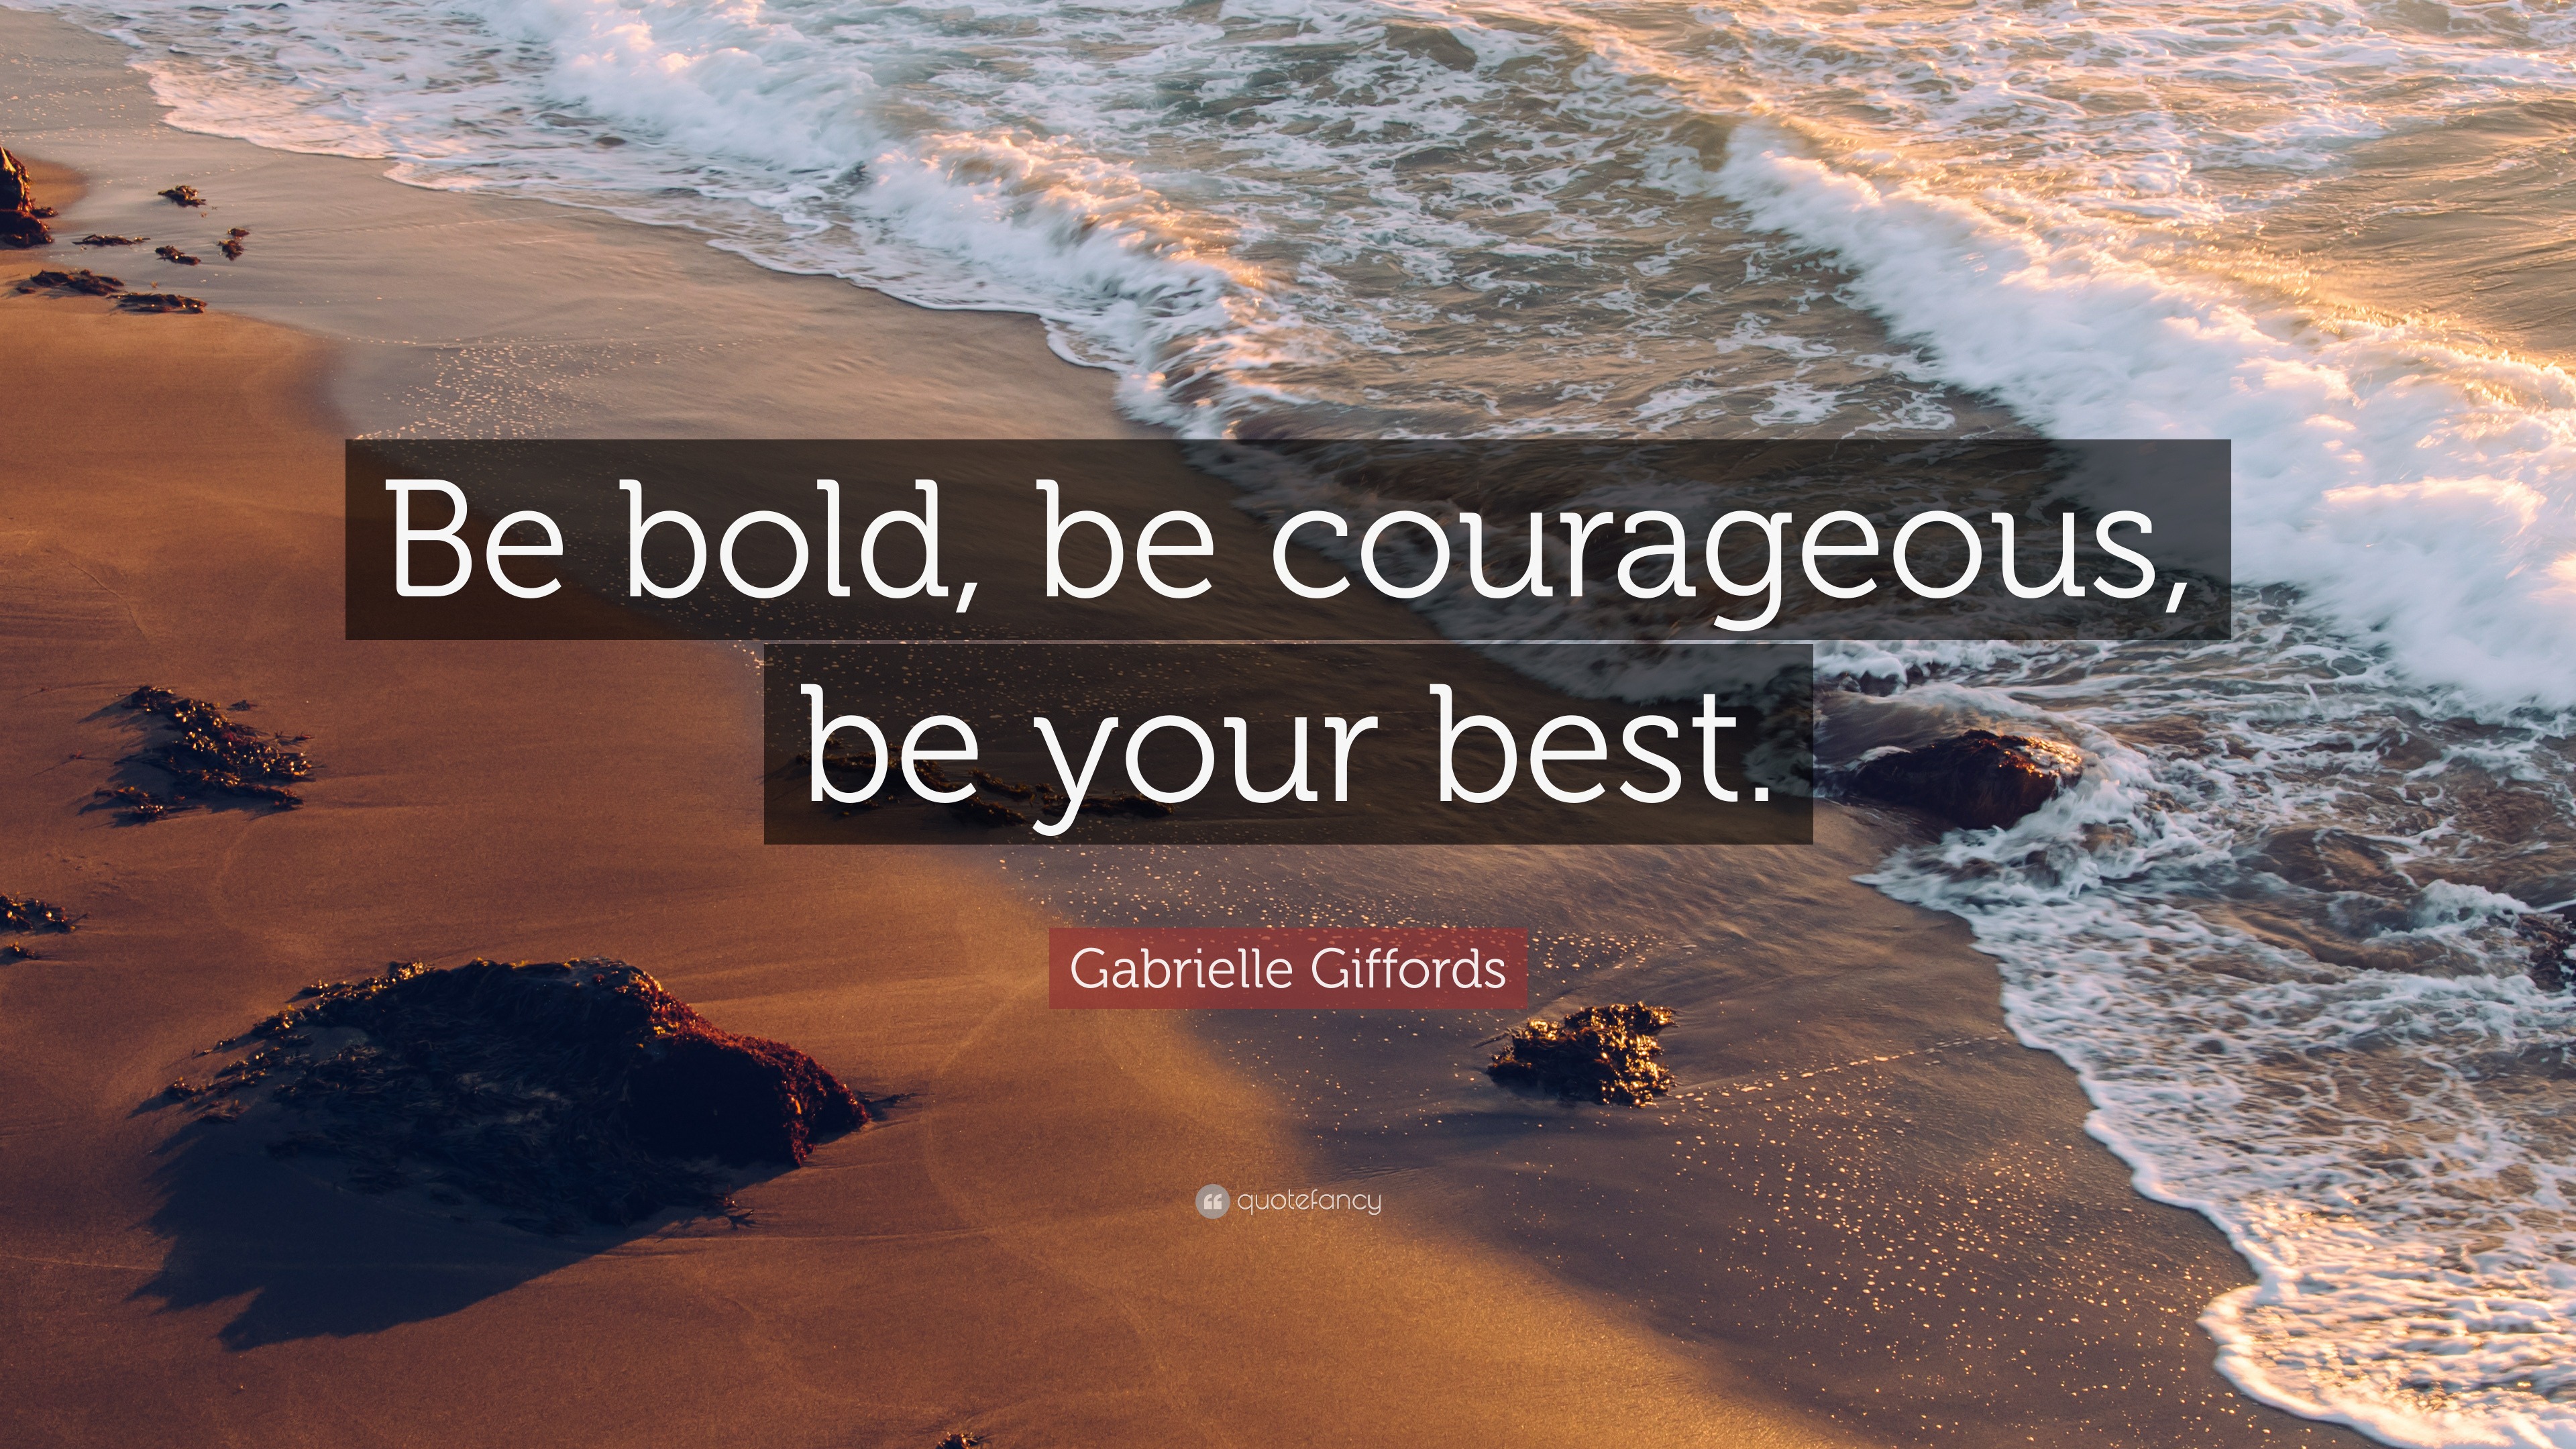 Gabrielle Fords Quote “be Bold Be Courageous Be Your Best”